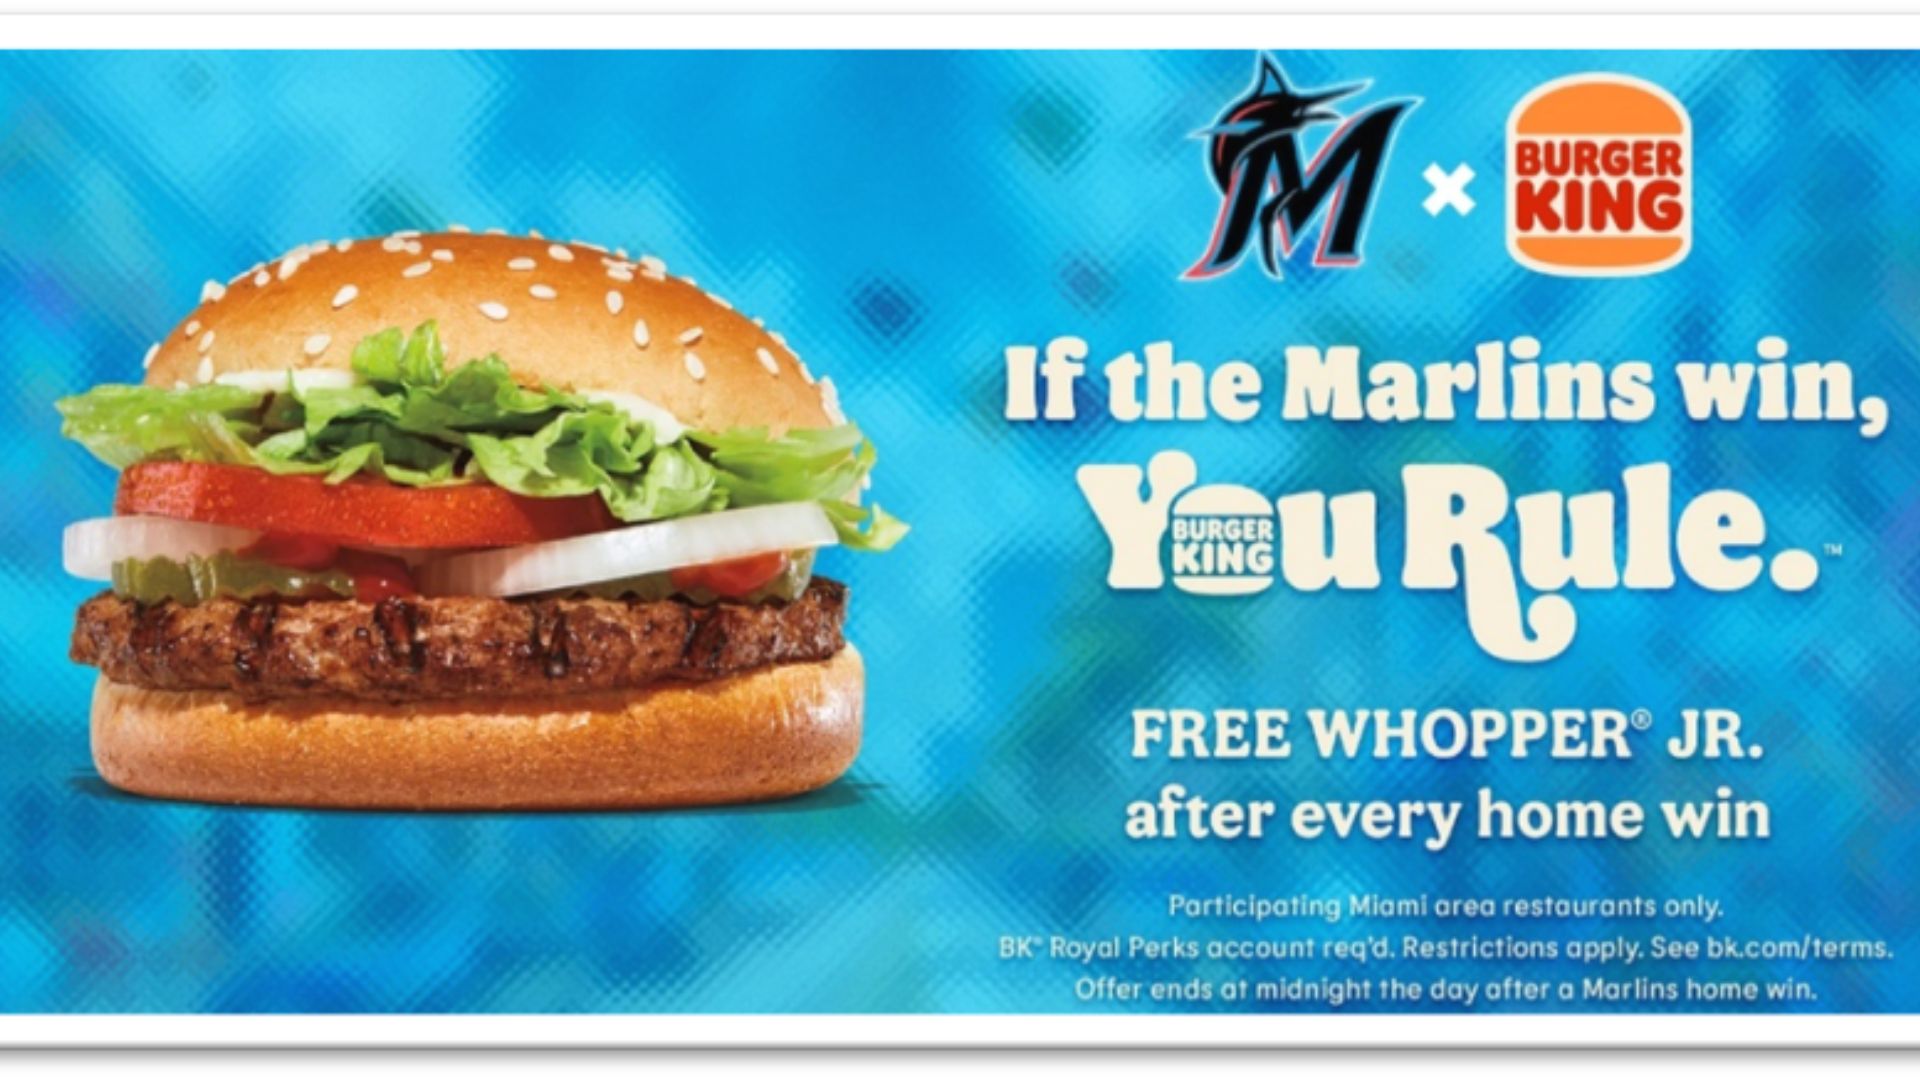 Miami Marlins and Burger King crew up to provide free Whopper Jr. for fans immediately after residence wins – WSVN 7Information | Miami Information, Temperature, Sports | Fort Lauderdale